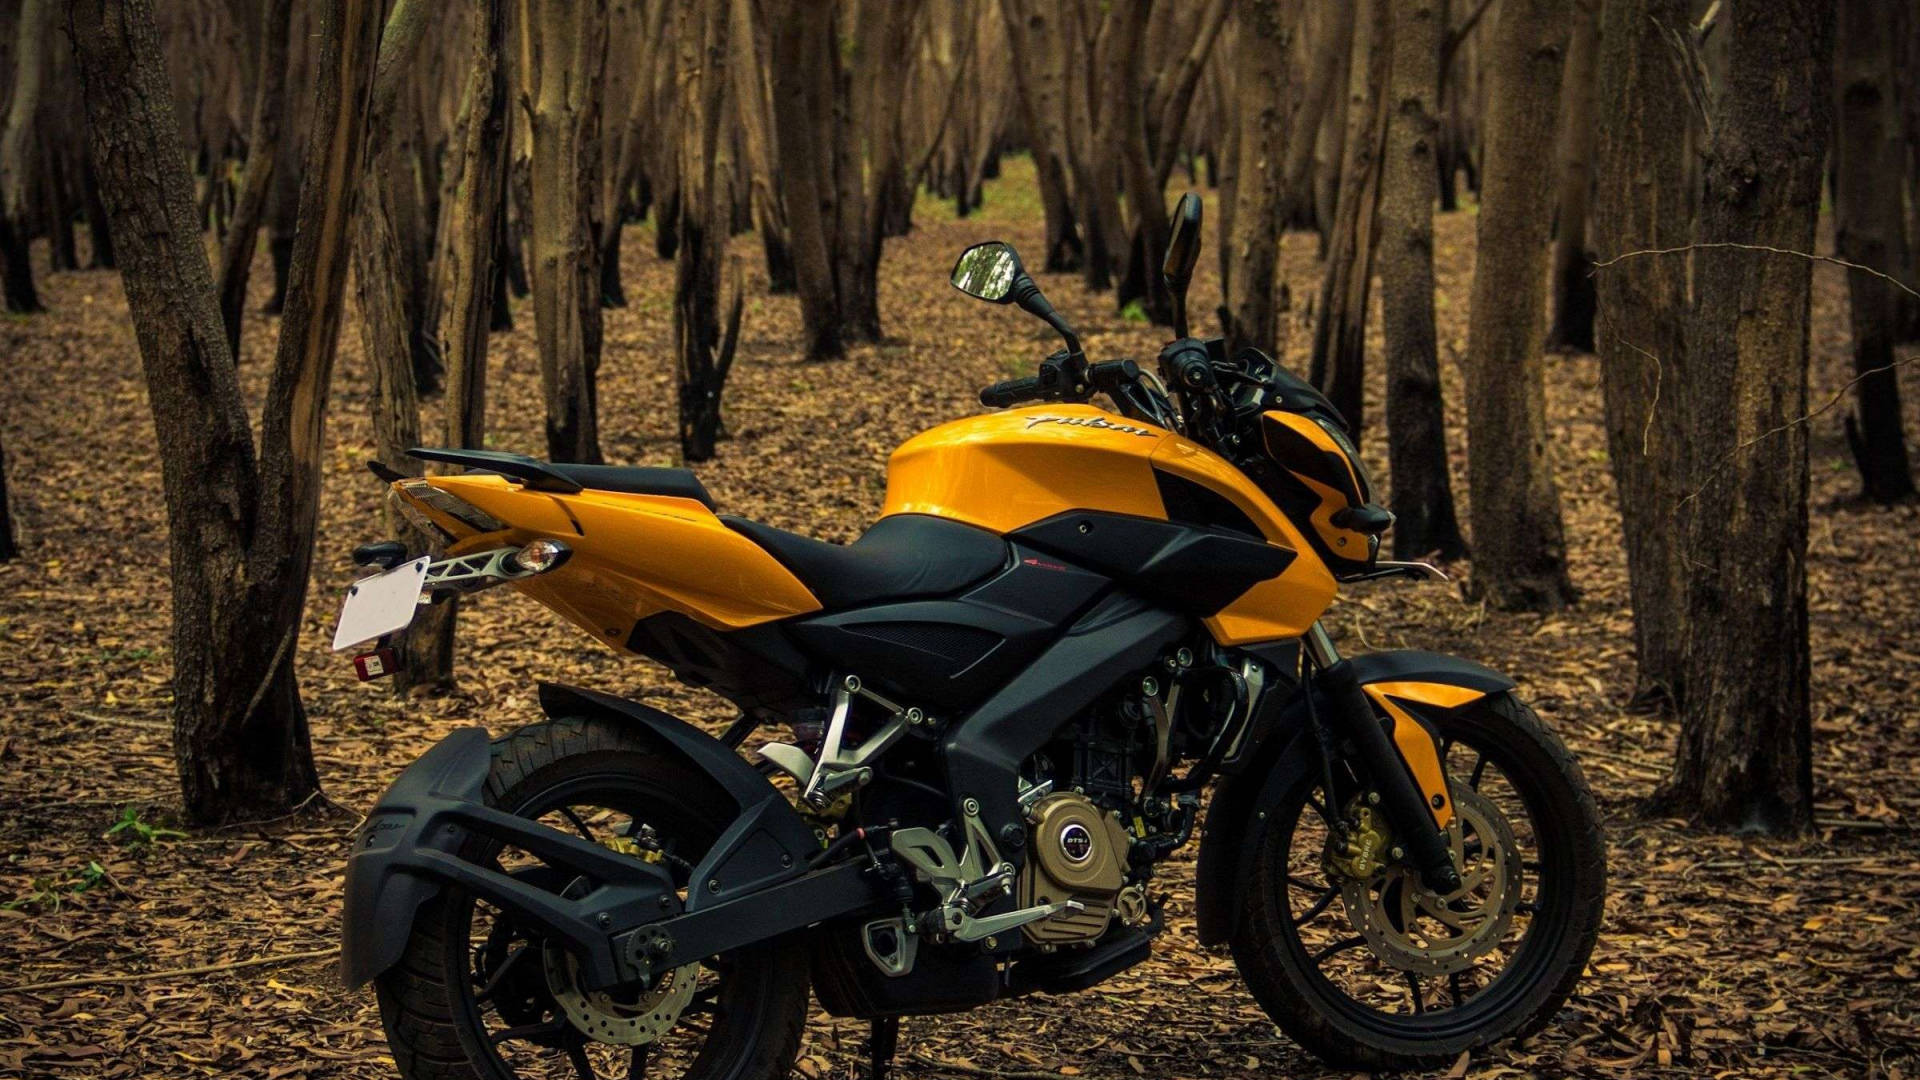 Powerful Pulsar Rs200 In The Depth Of The Forest